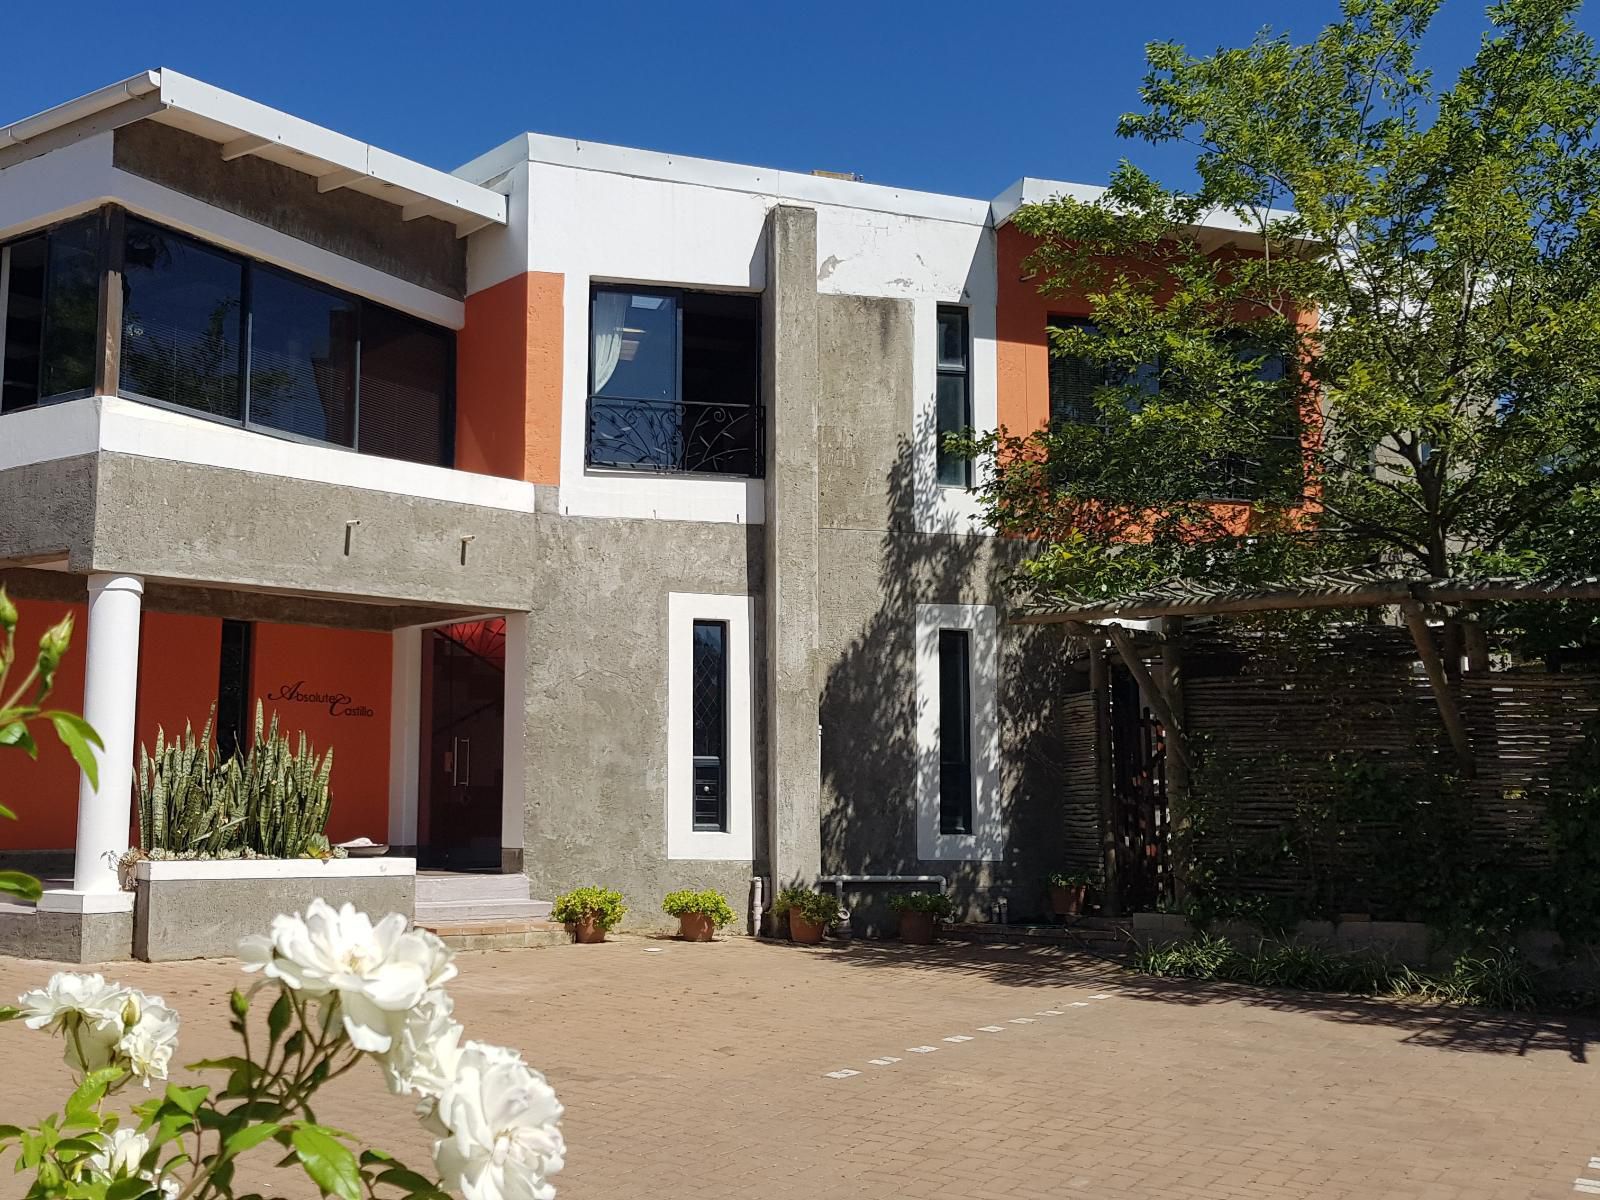 Absolute Castillo Riebeek Kasteel Western Cape South Africa Building, Architecture, House